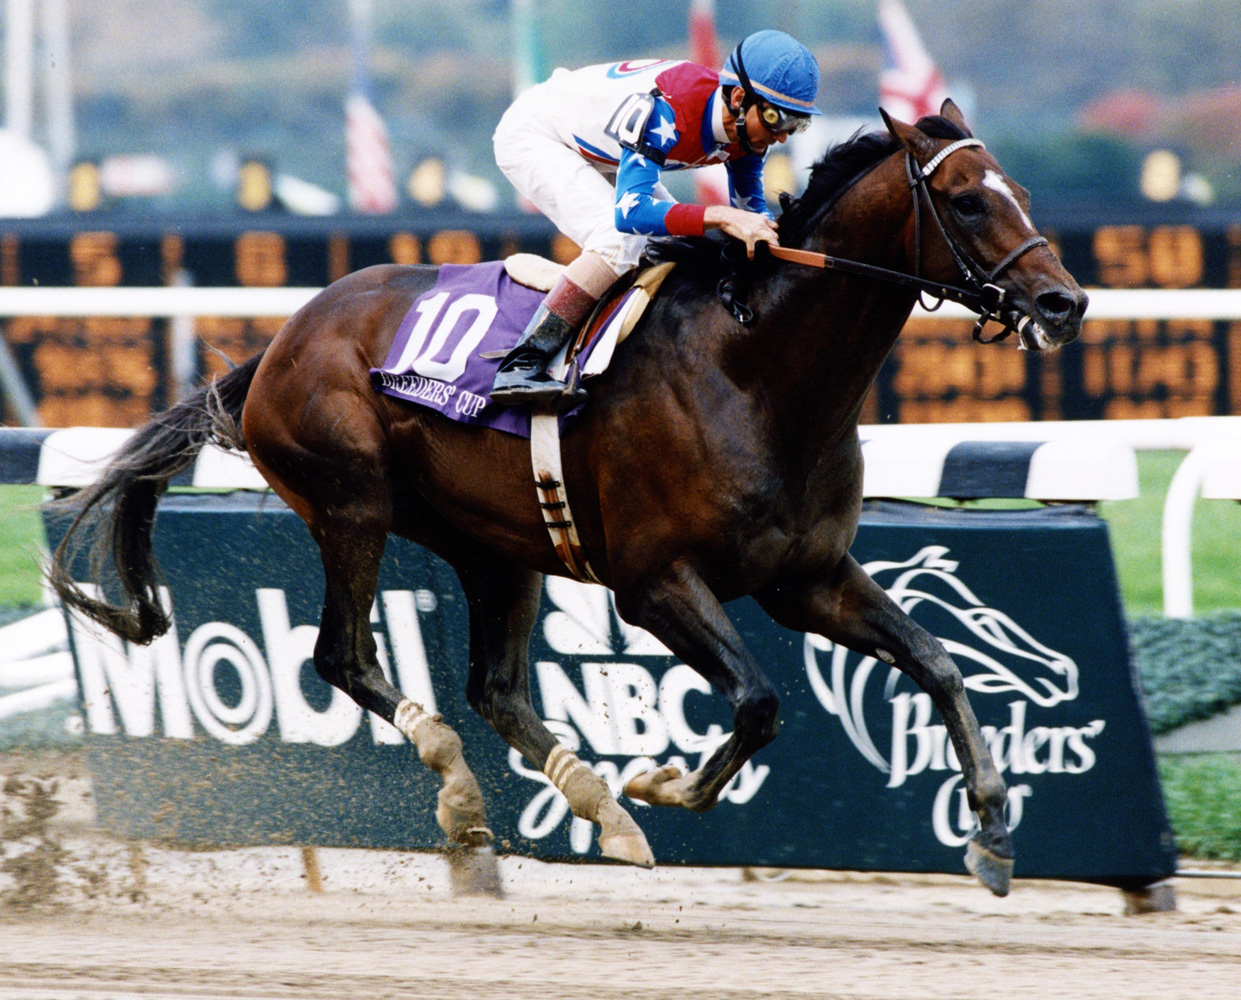 Jerry Bailey and Cigar winning the 1995 Breeders' Cup Classic at Belmont Park (Elite Photo/Museum Collection)